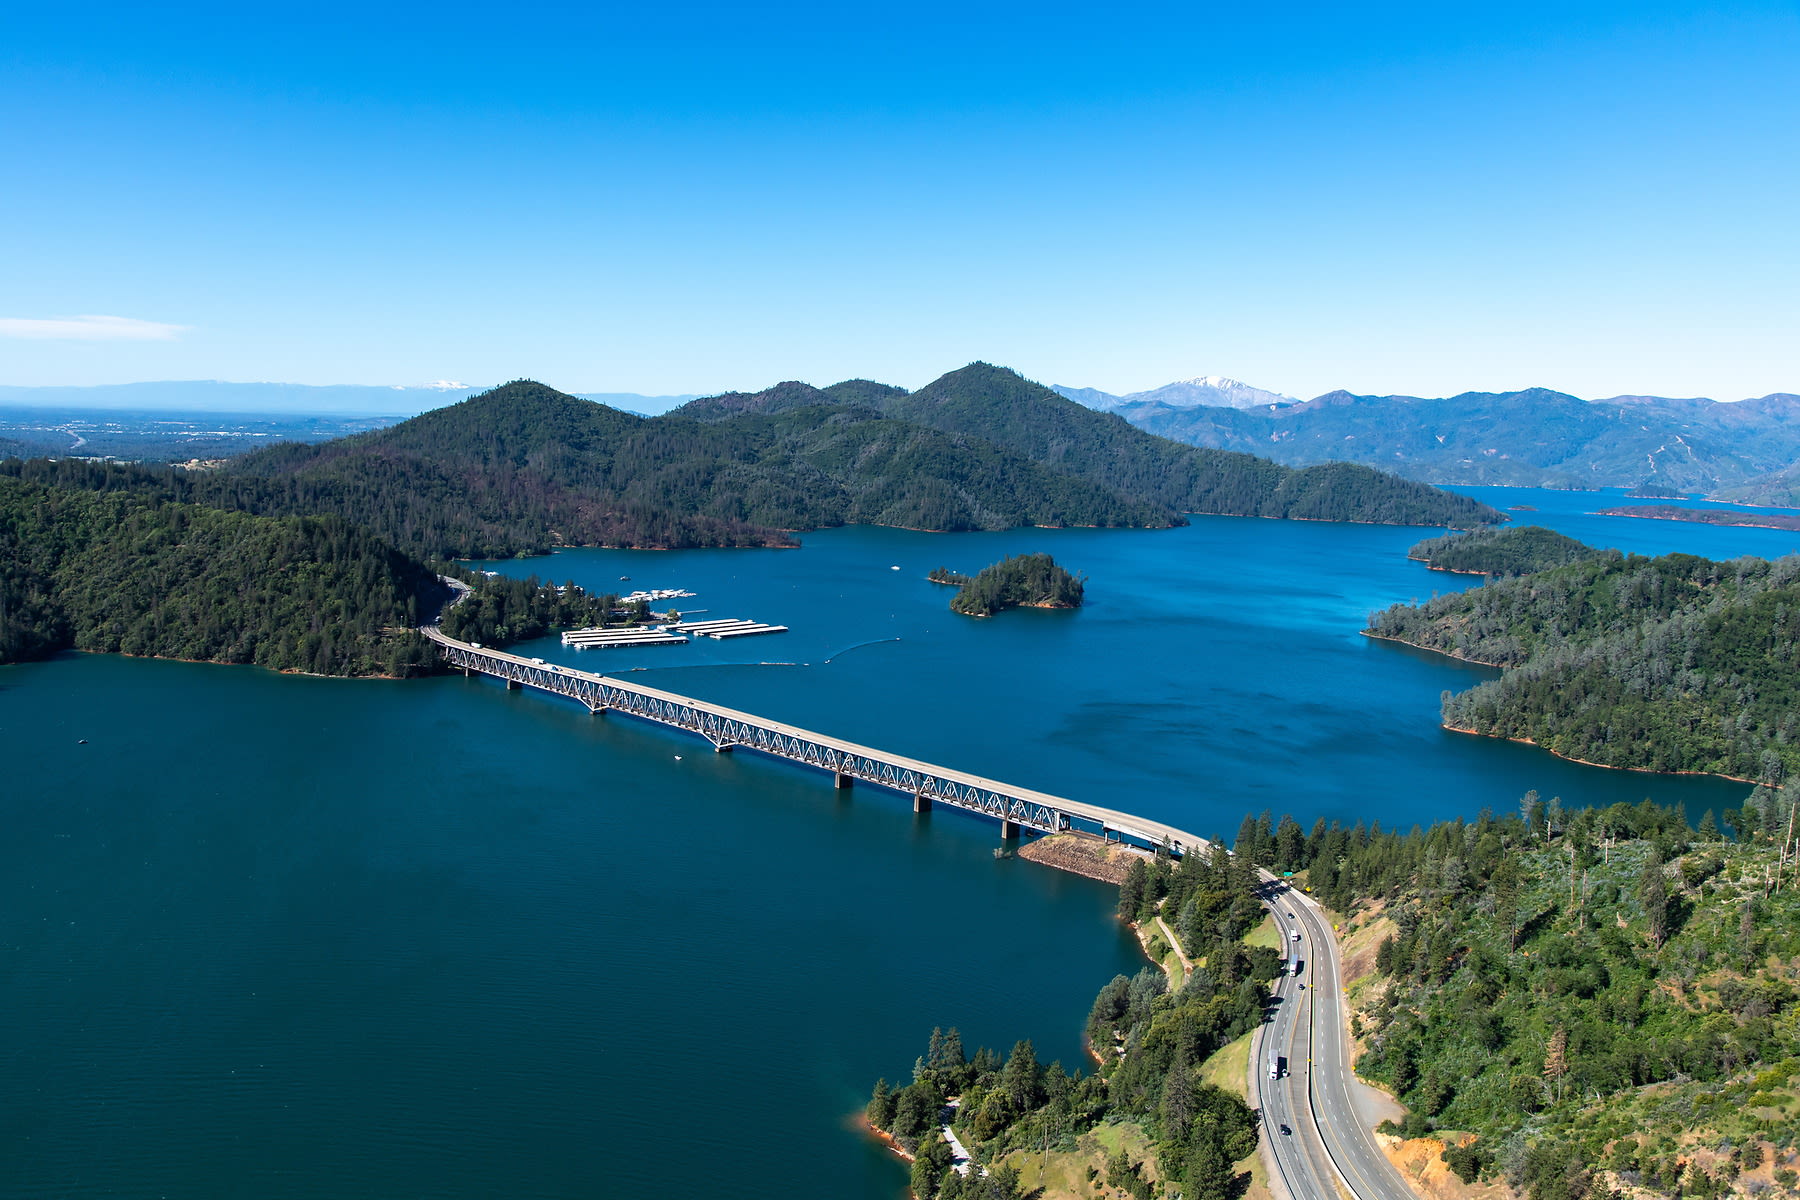 In striking before-and-after photos, a parched Lake Shasta is transformed